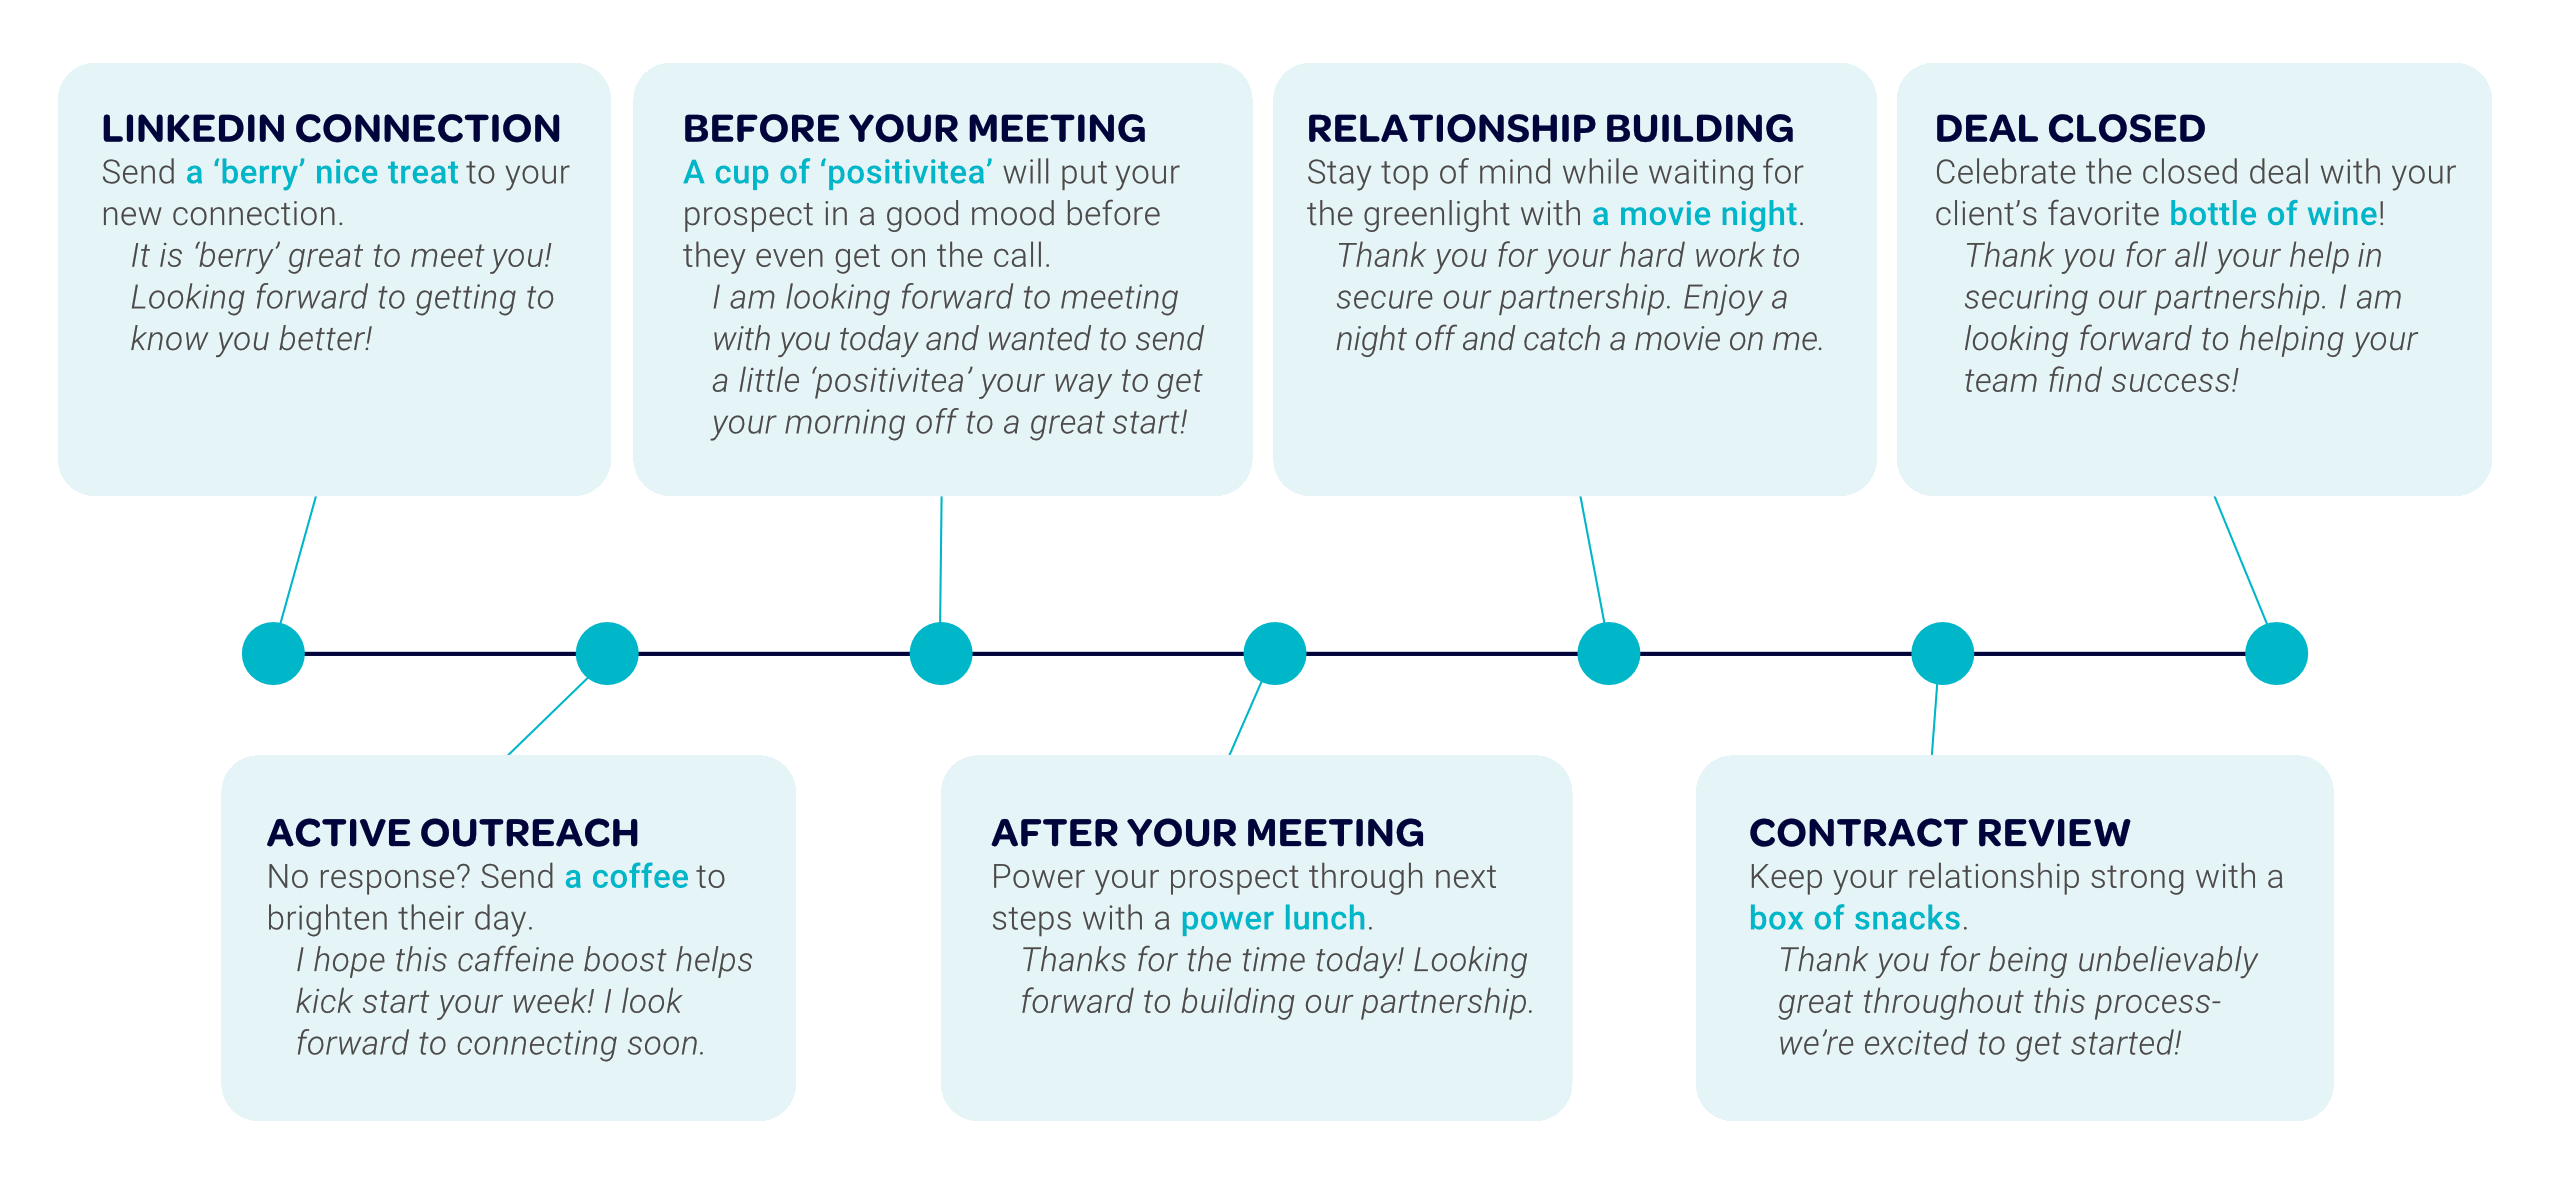 Sales Cycle Best Practices for Thnks